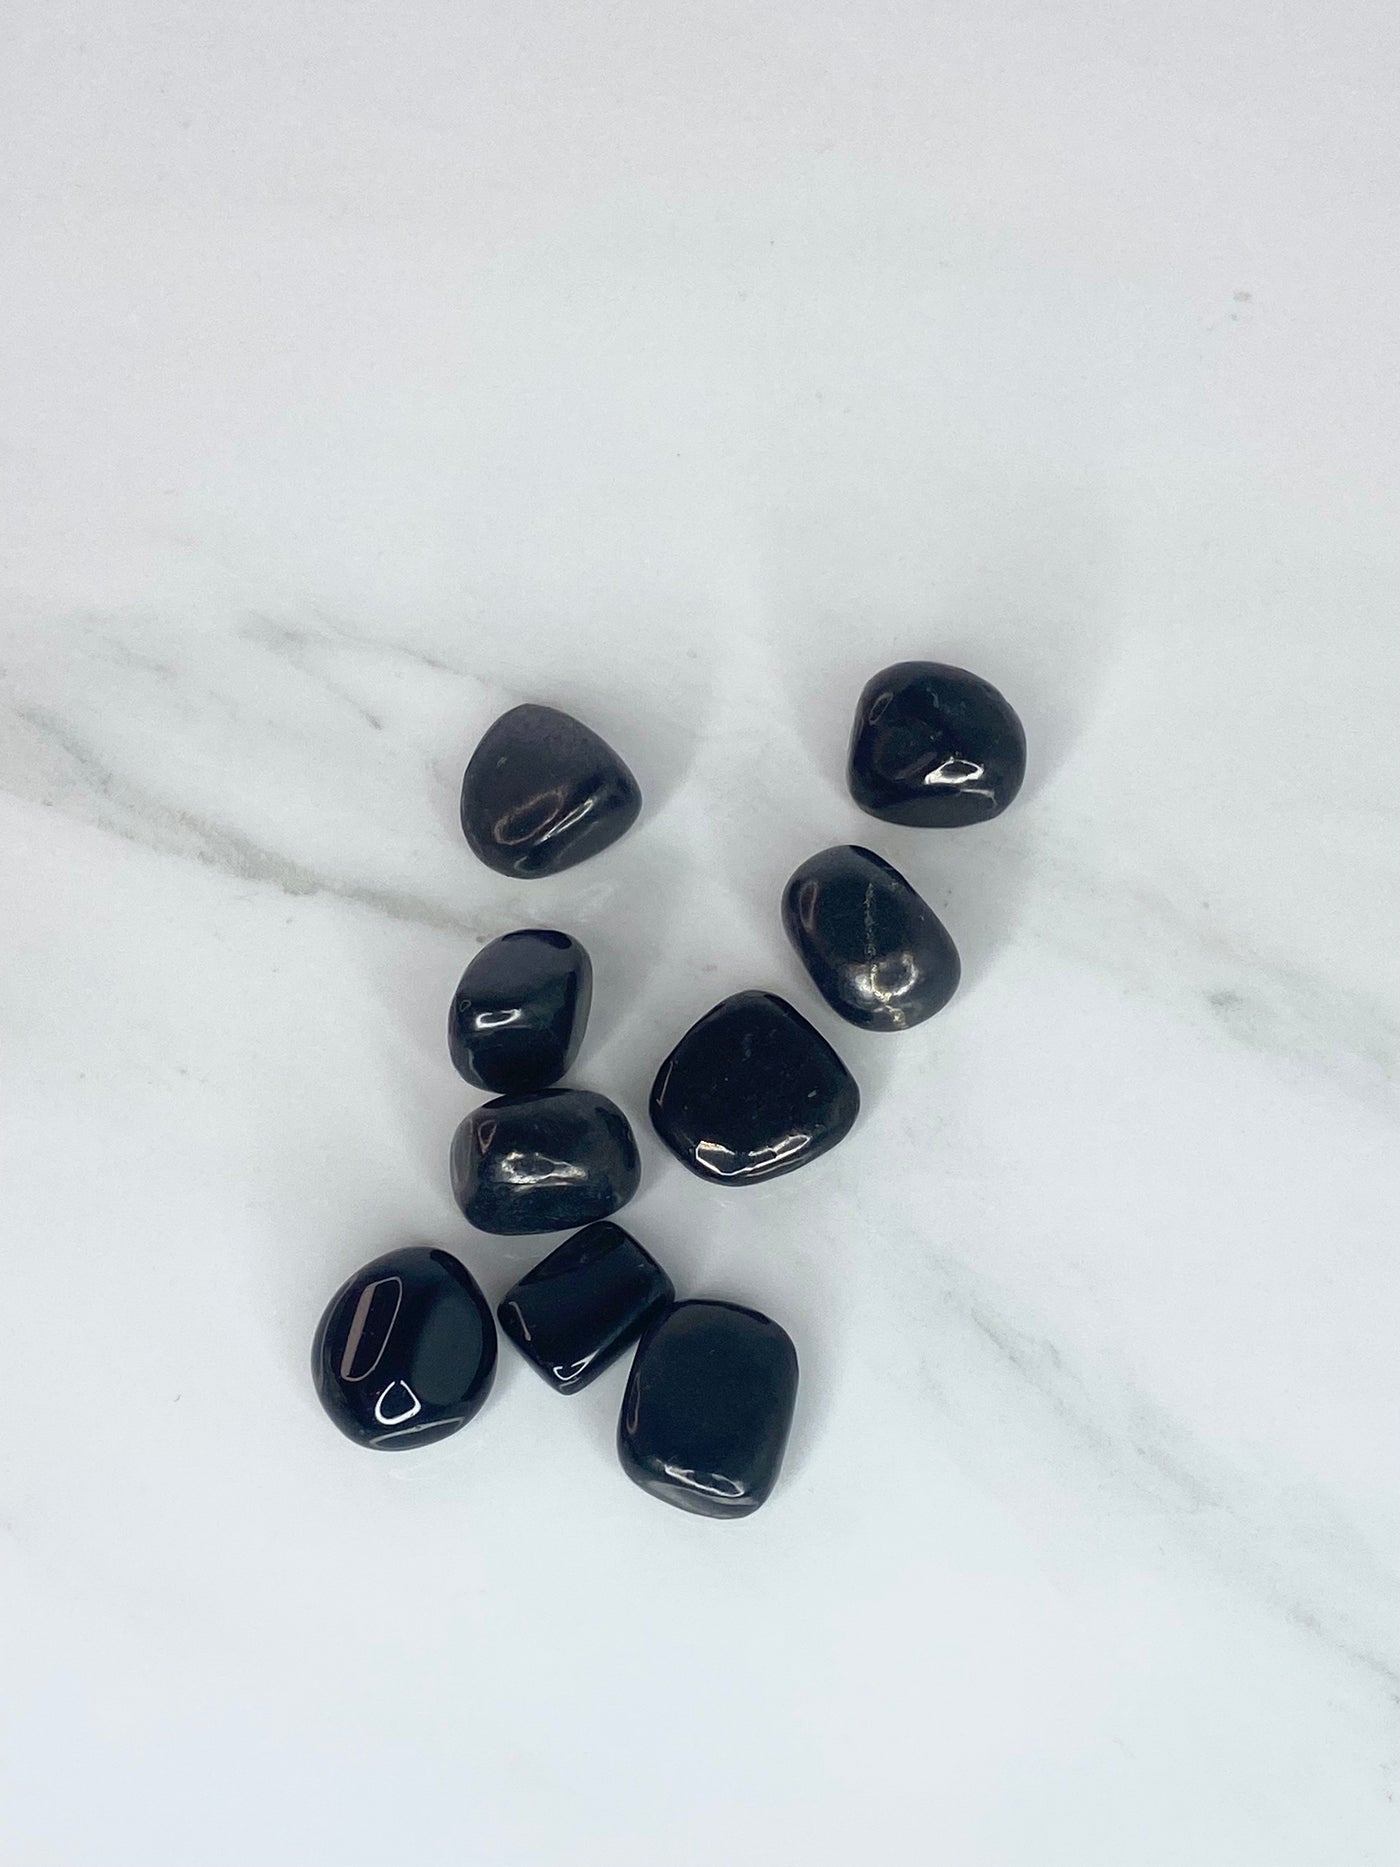 SHUNGITE- THE STONE TO DEFLECT ELECTRO-MAGNETIC INTERFERRENCE